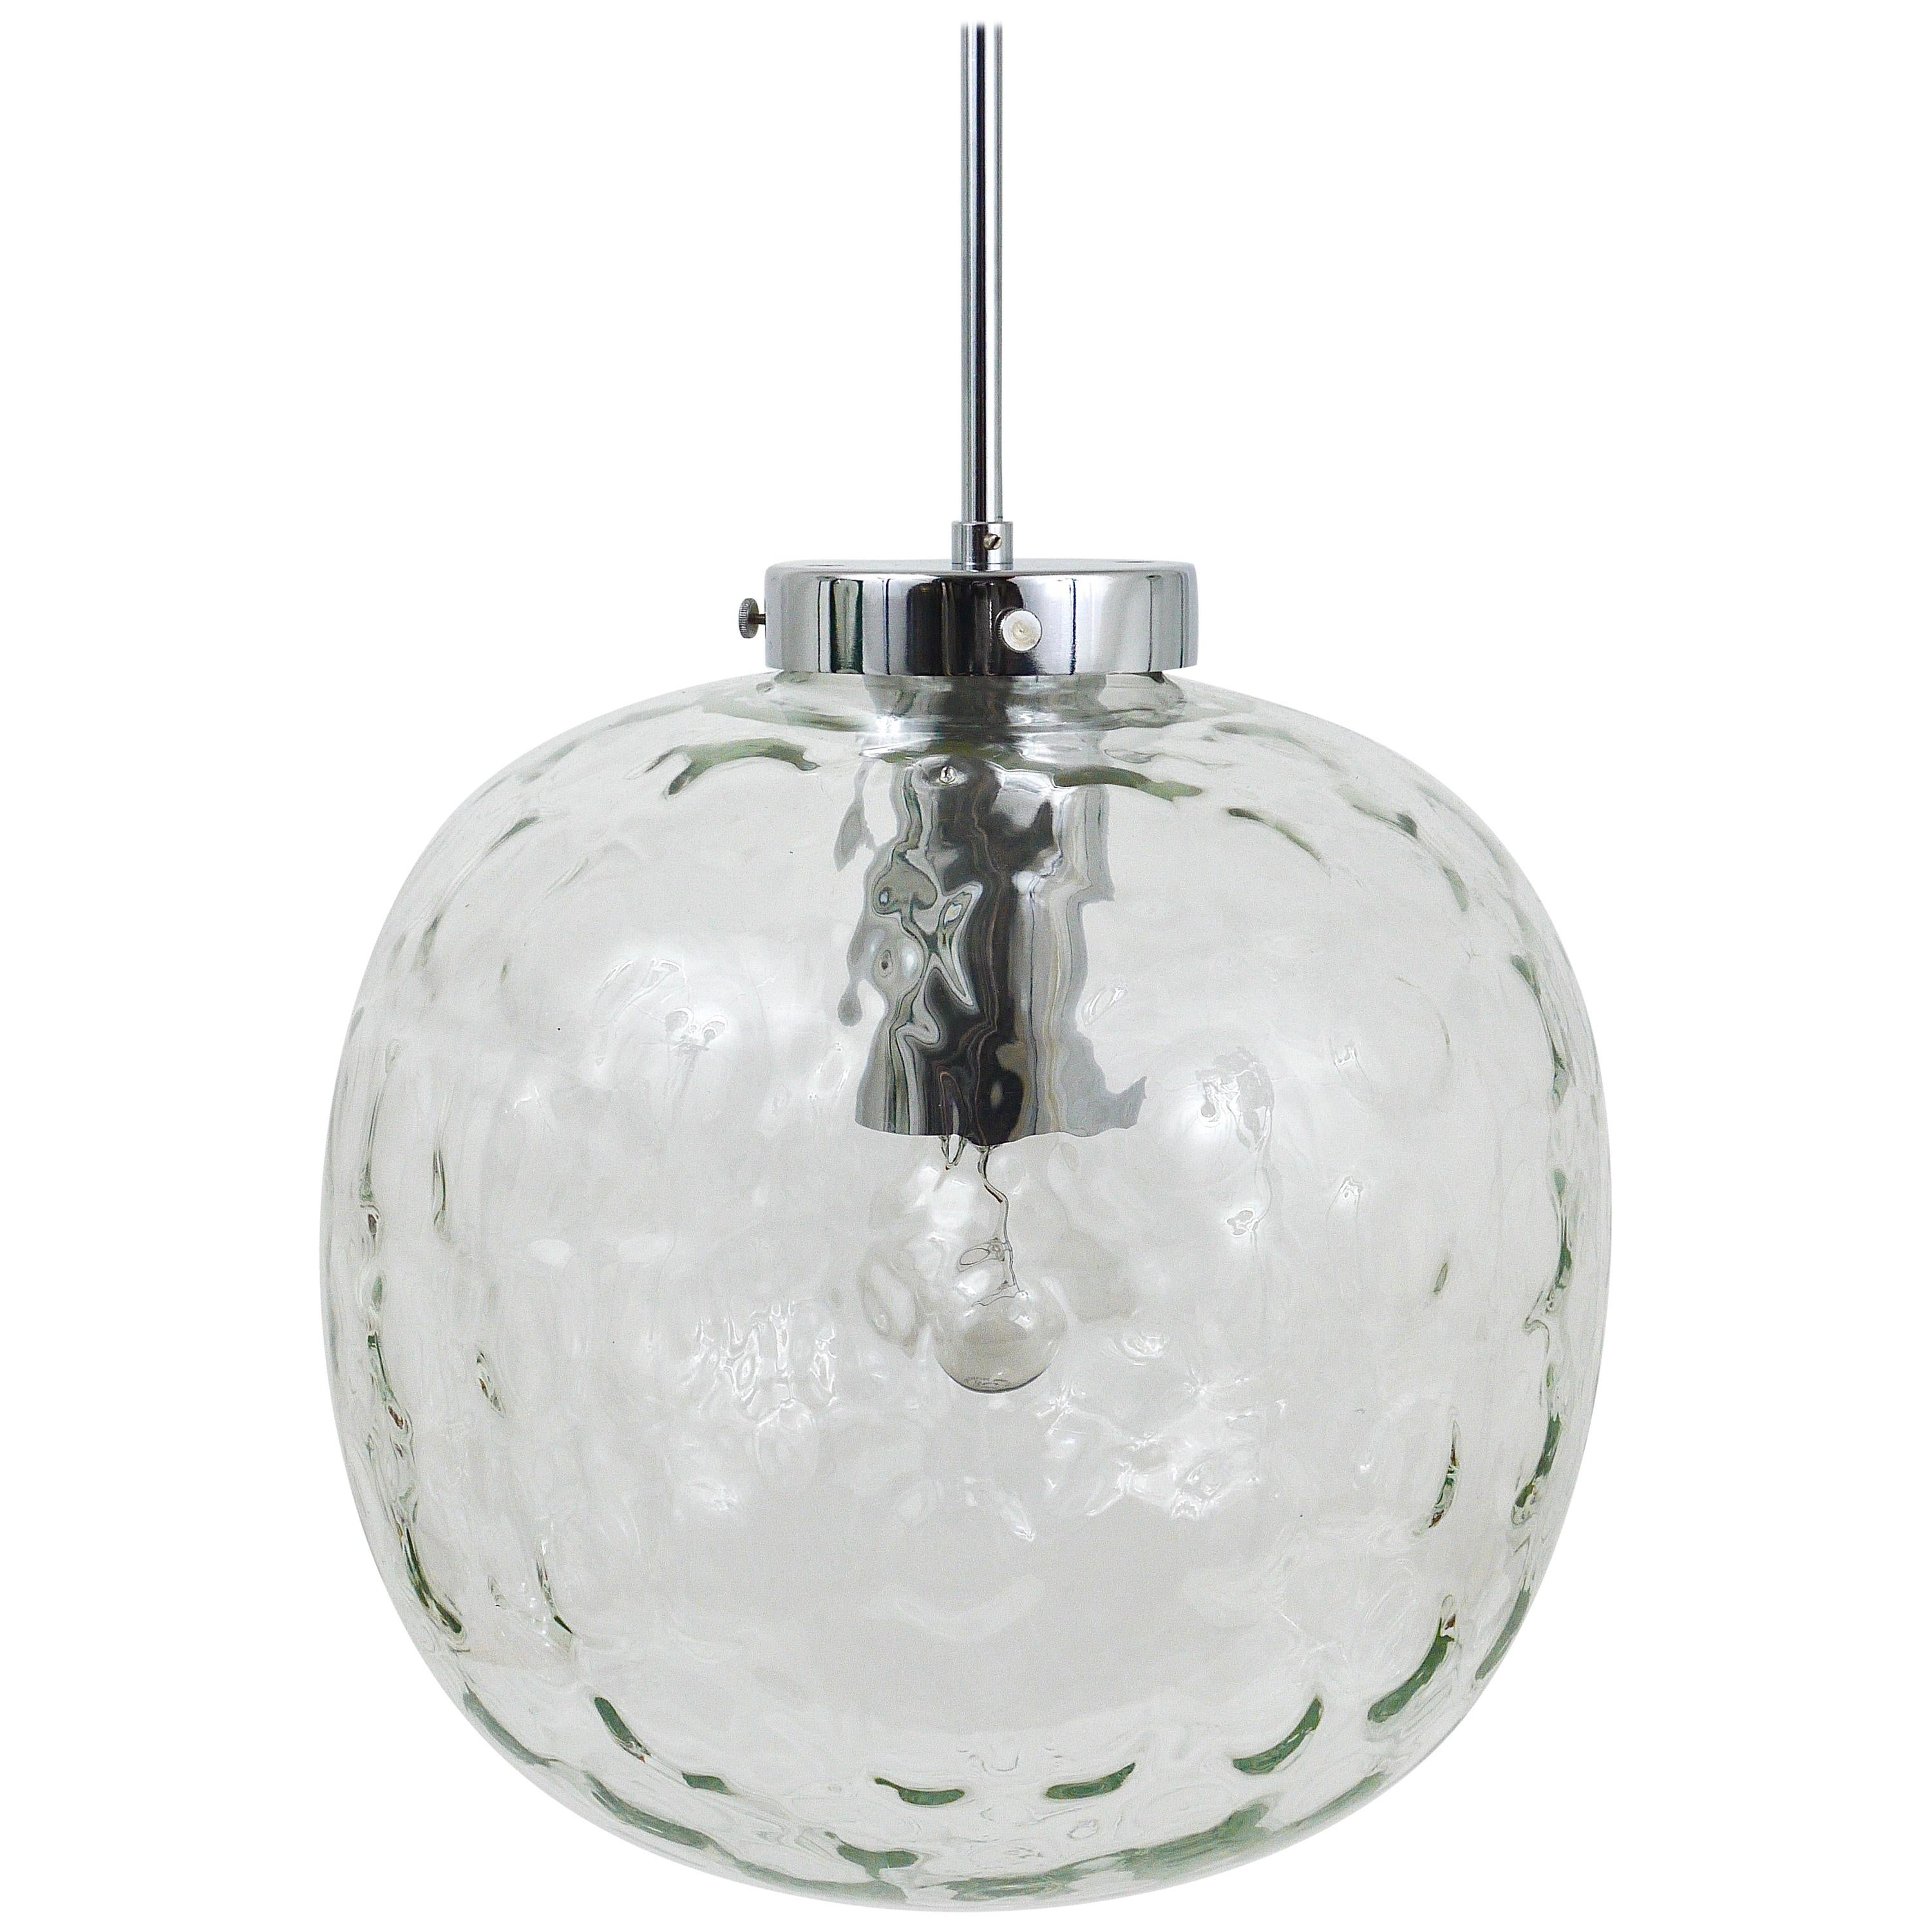 Large Bubble Melting Glass and Chrome Globe Pendant Lamp, Germany, 1970s For Sale